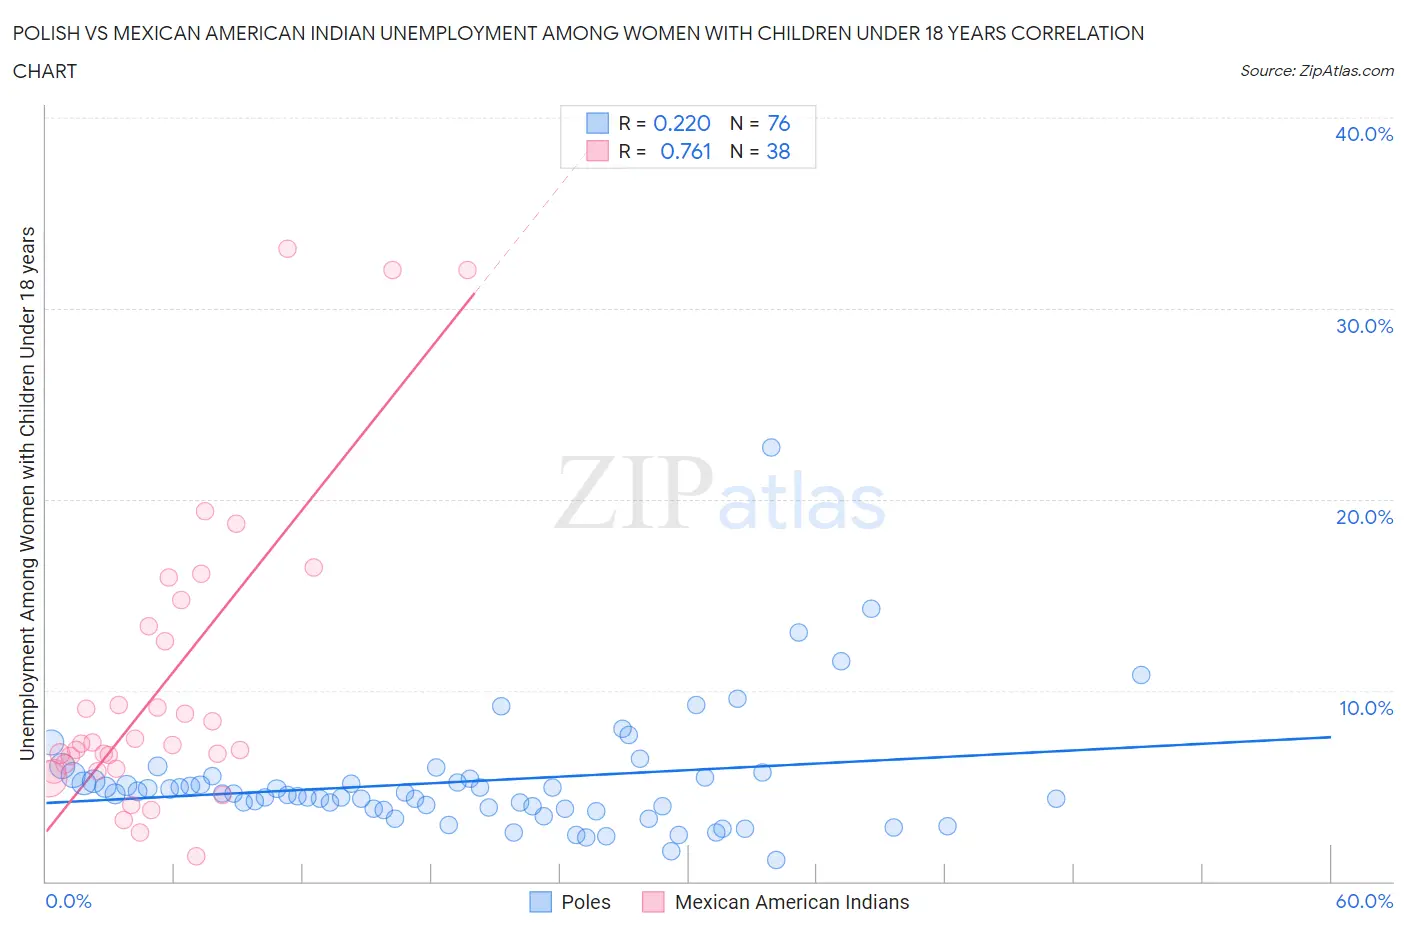 Polish vs Mexican American Indian Unemployment Among Women with Children Under 18 years